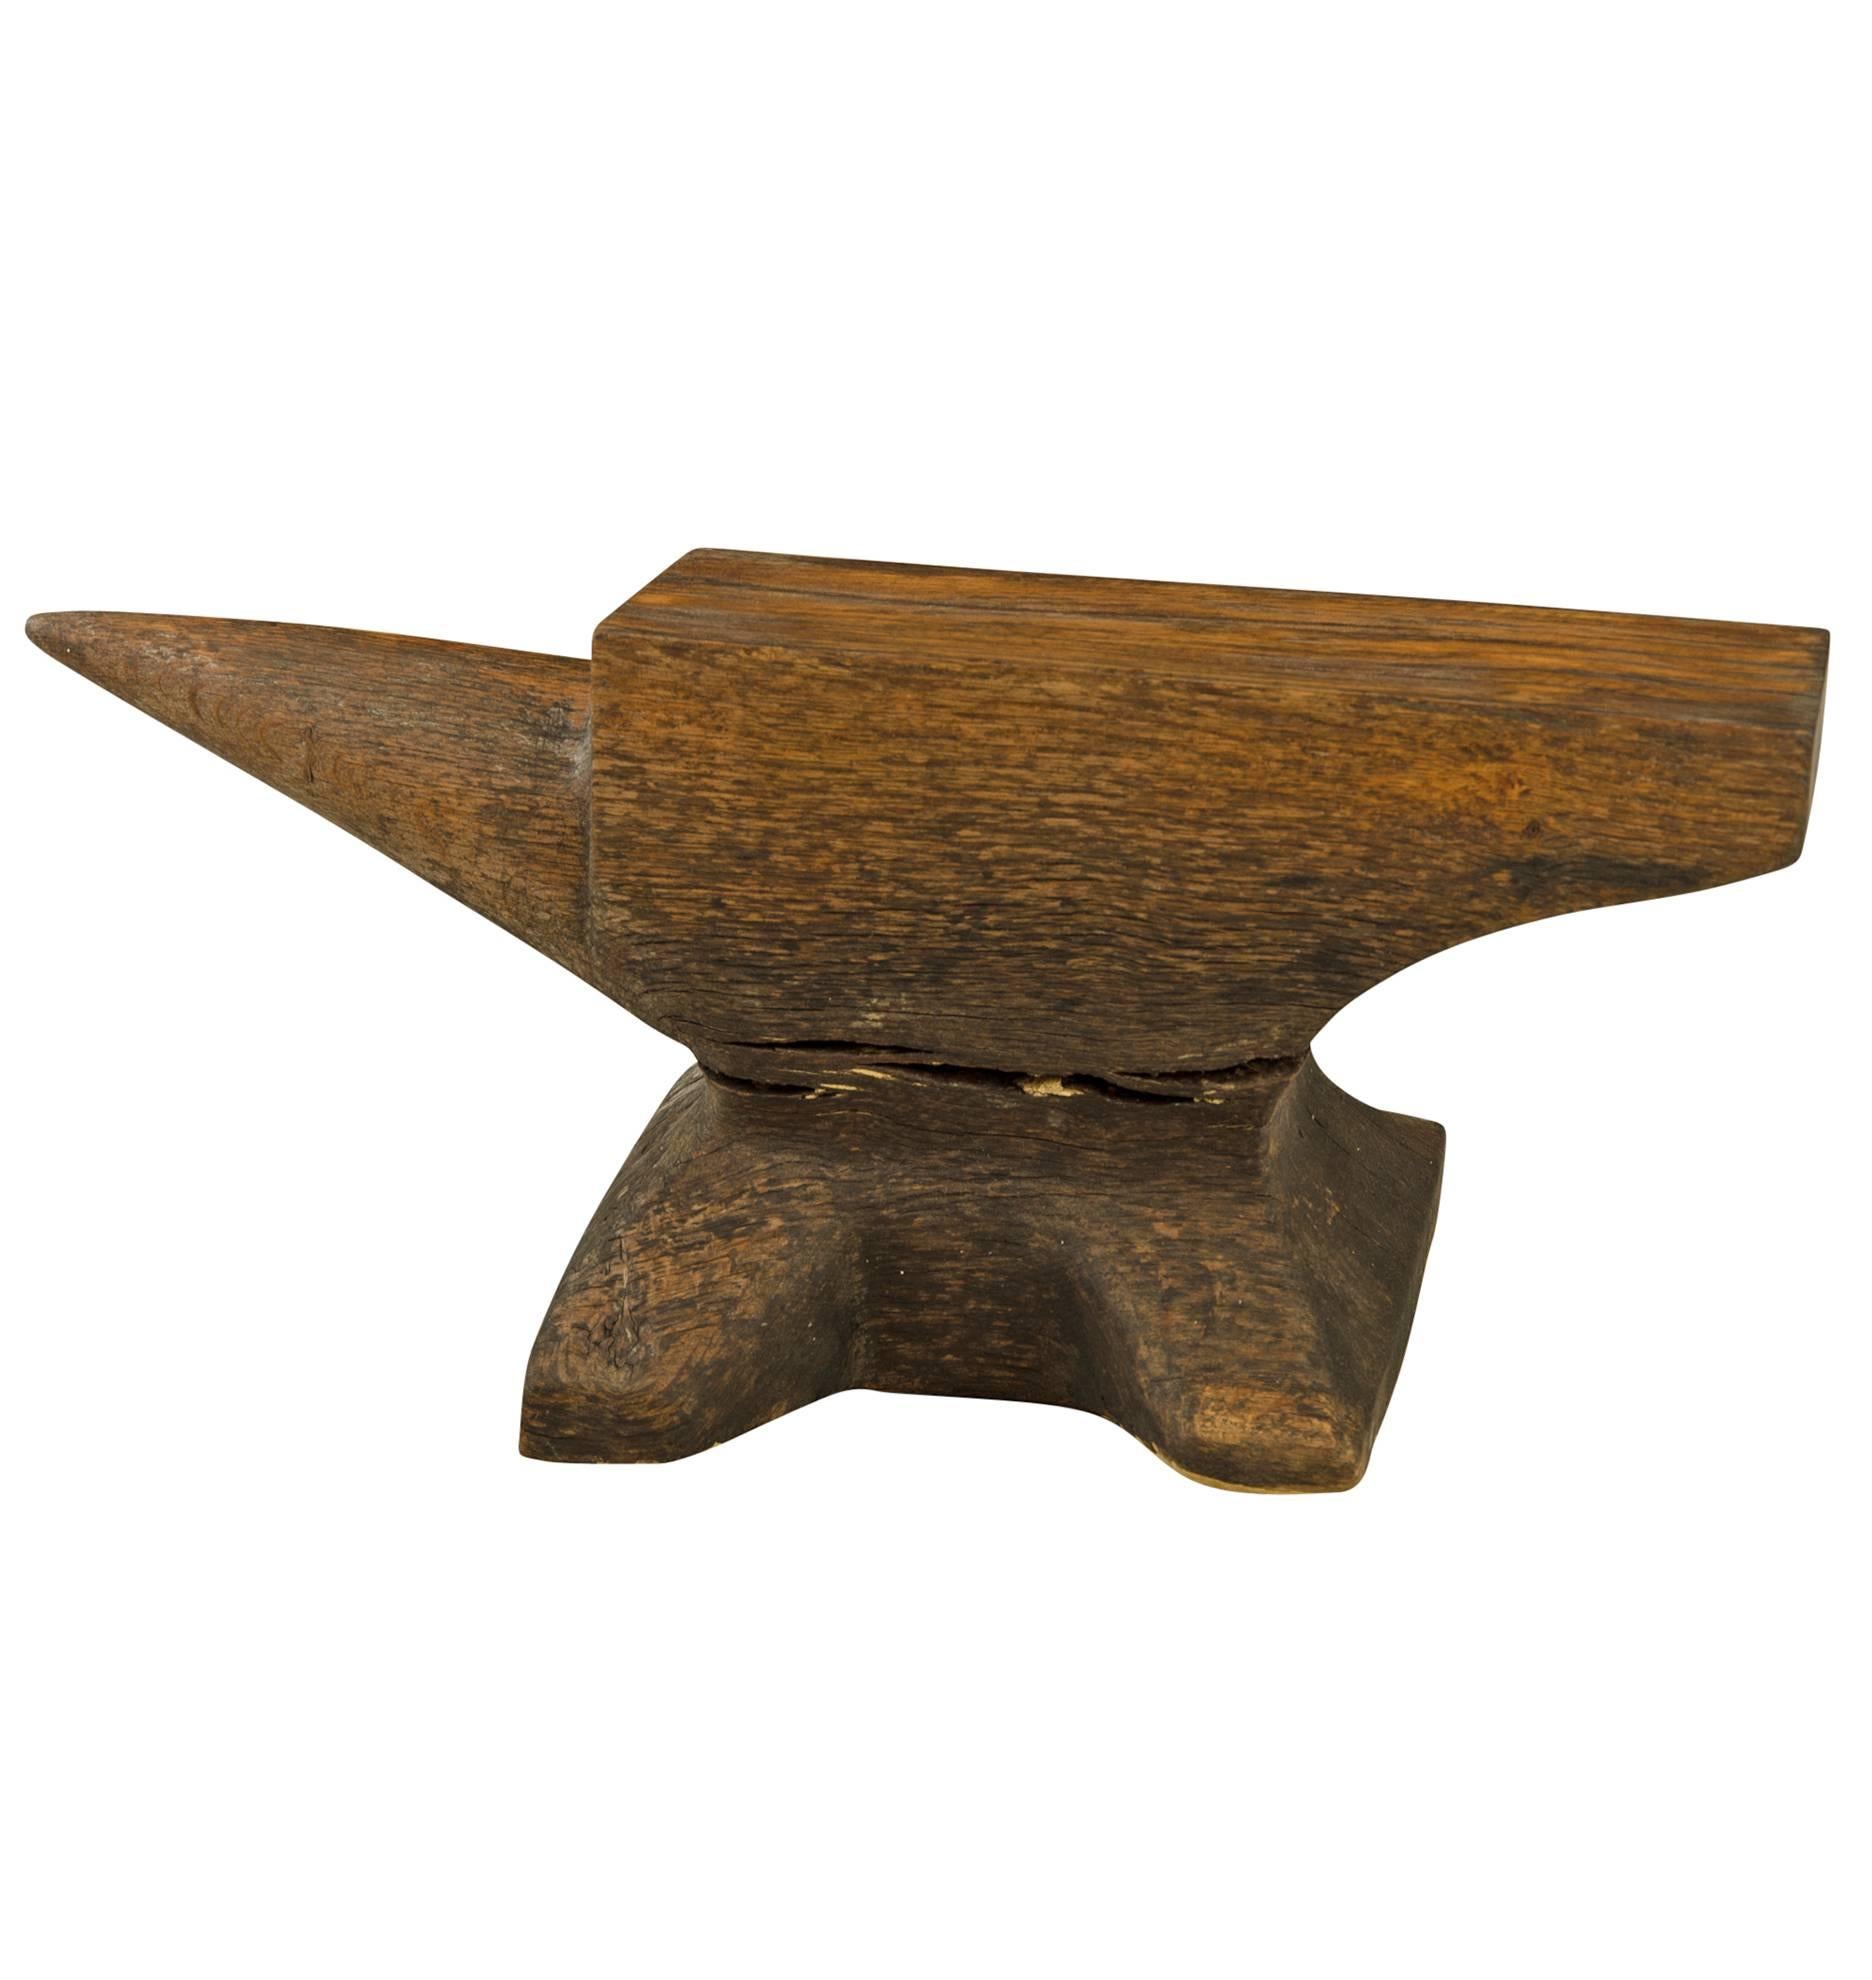 Have you ever wondered how those incredible 125 pound blacksmith anvils were made. This is how: A craftsman hand-carved a wooden form, which was then pressed into wet sand. The molten iron was poured into the sand, this process is known as sand